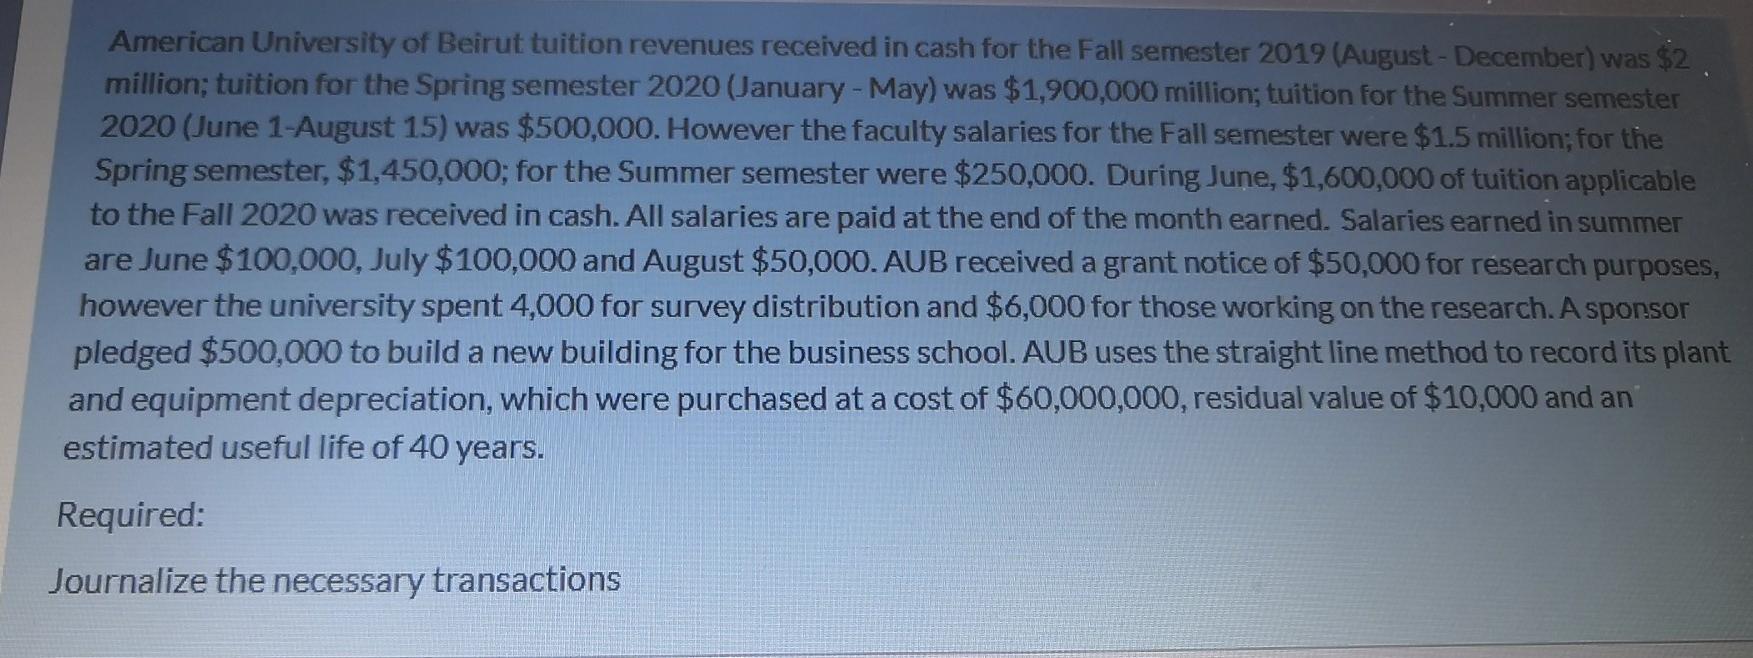 American University of Beirut tuition revenues received in cash for the Fall semester 2019 (August - December) was $2 million